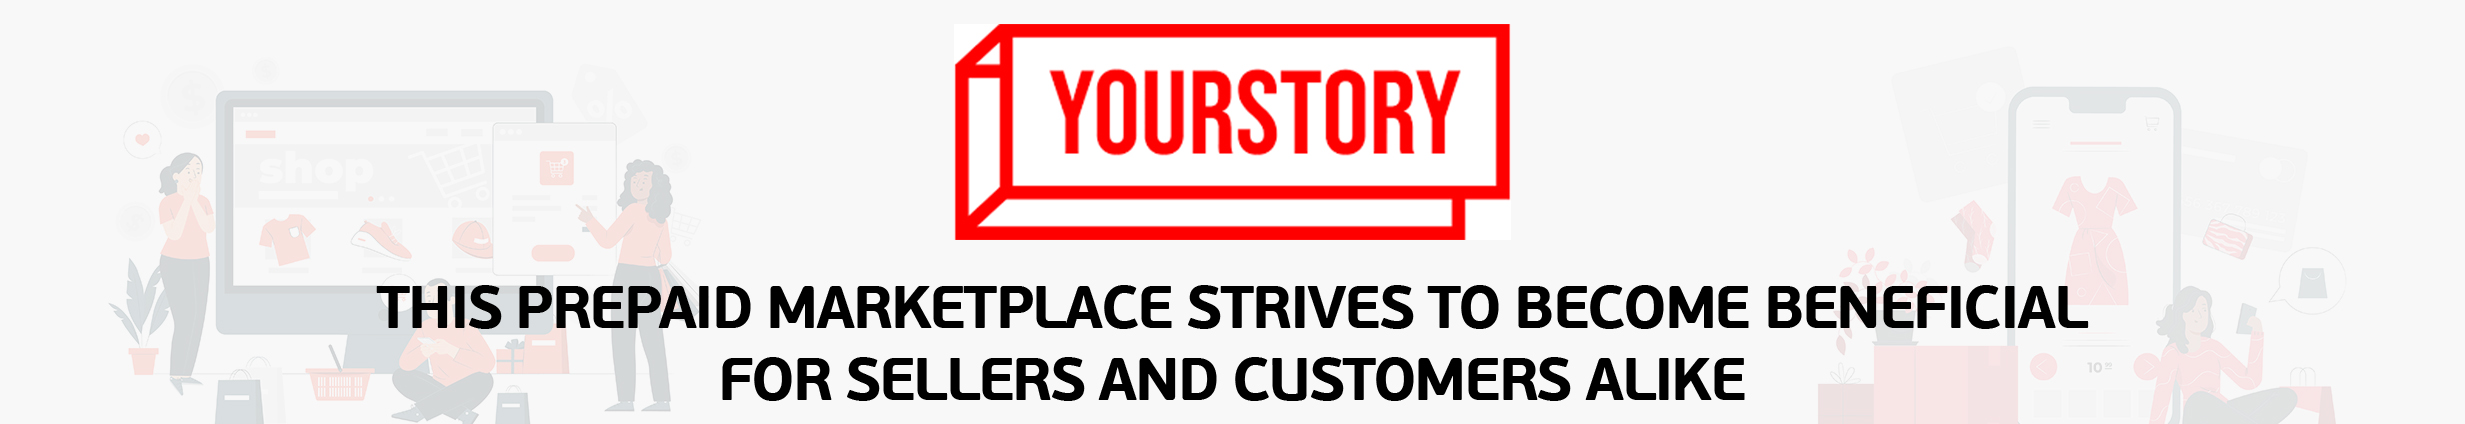 YourStory 